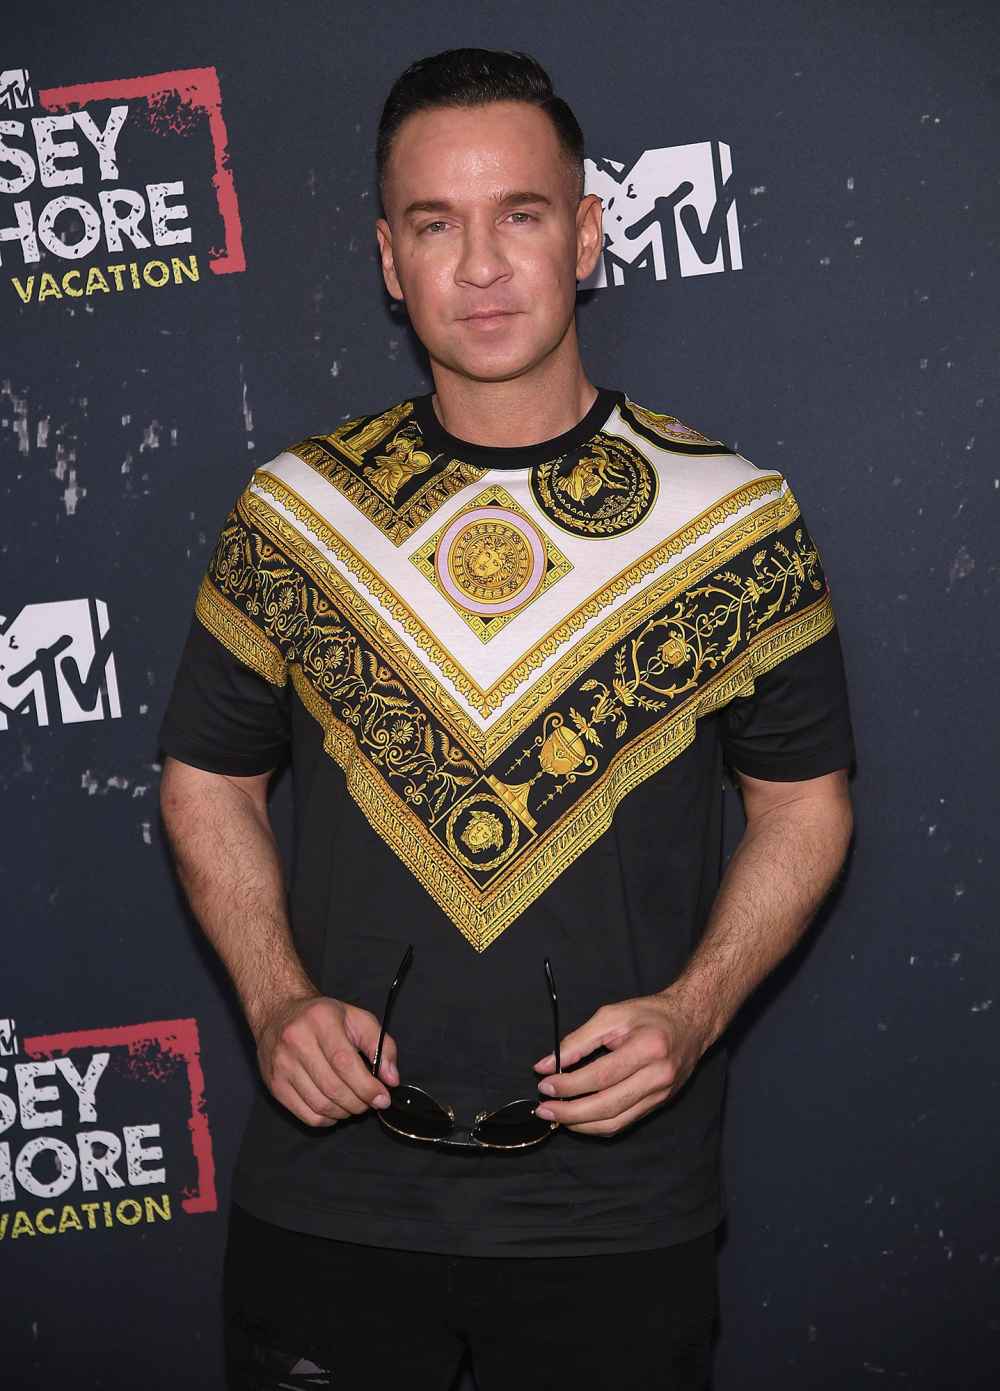 Mike 'The Situation' Sorrentino Gives Update on Legal Troubles: ‘My Current Situation Is Not My Final Destination’